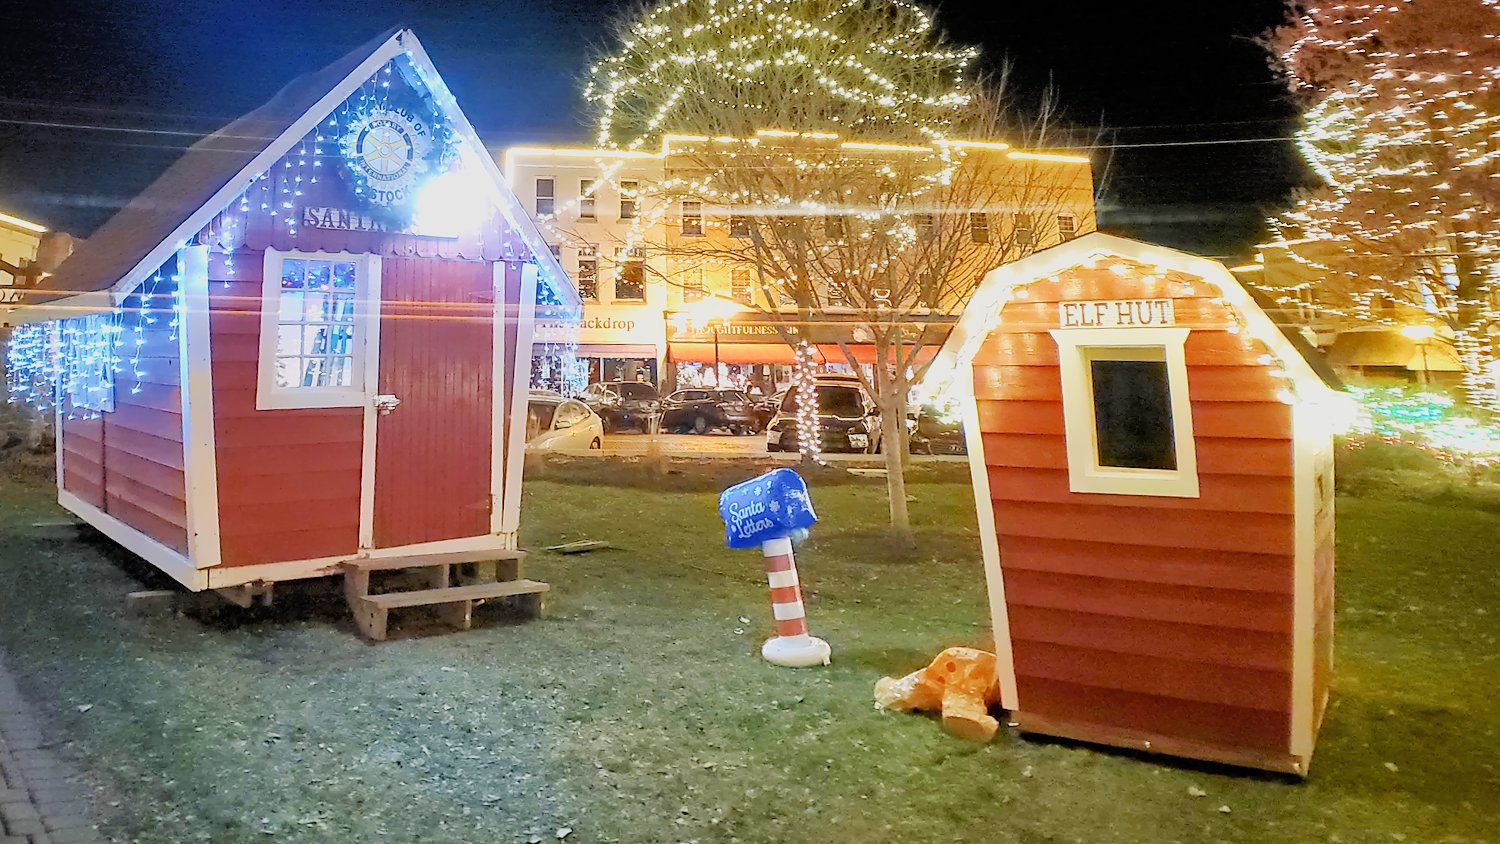 Santa house, elf hut, and sleeping gingerbread man at the Historic Square in Woodstock, IL.